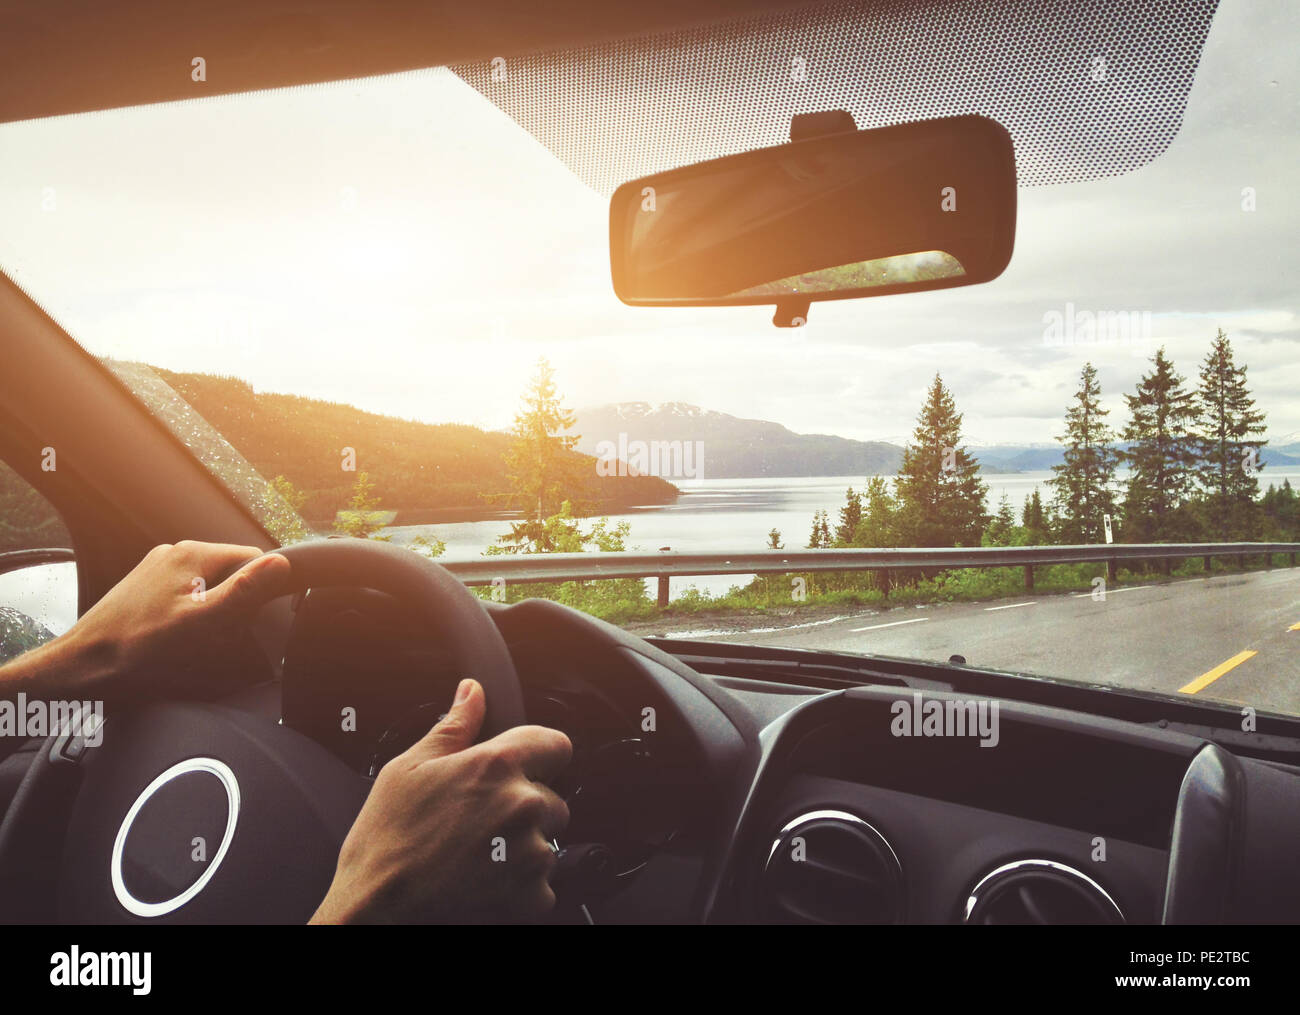 driving car in Norway, roadtrip, hands of driver on steering wheel Stock Photo